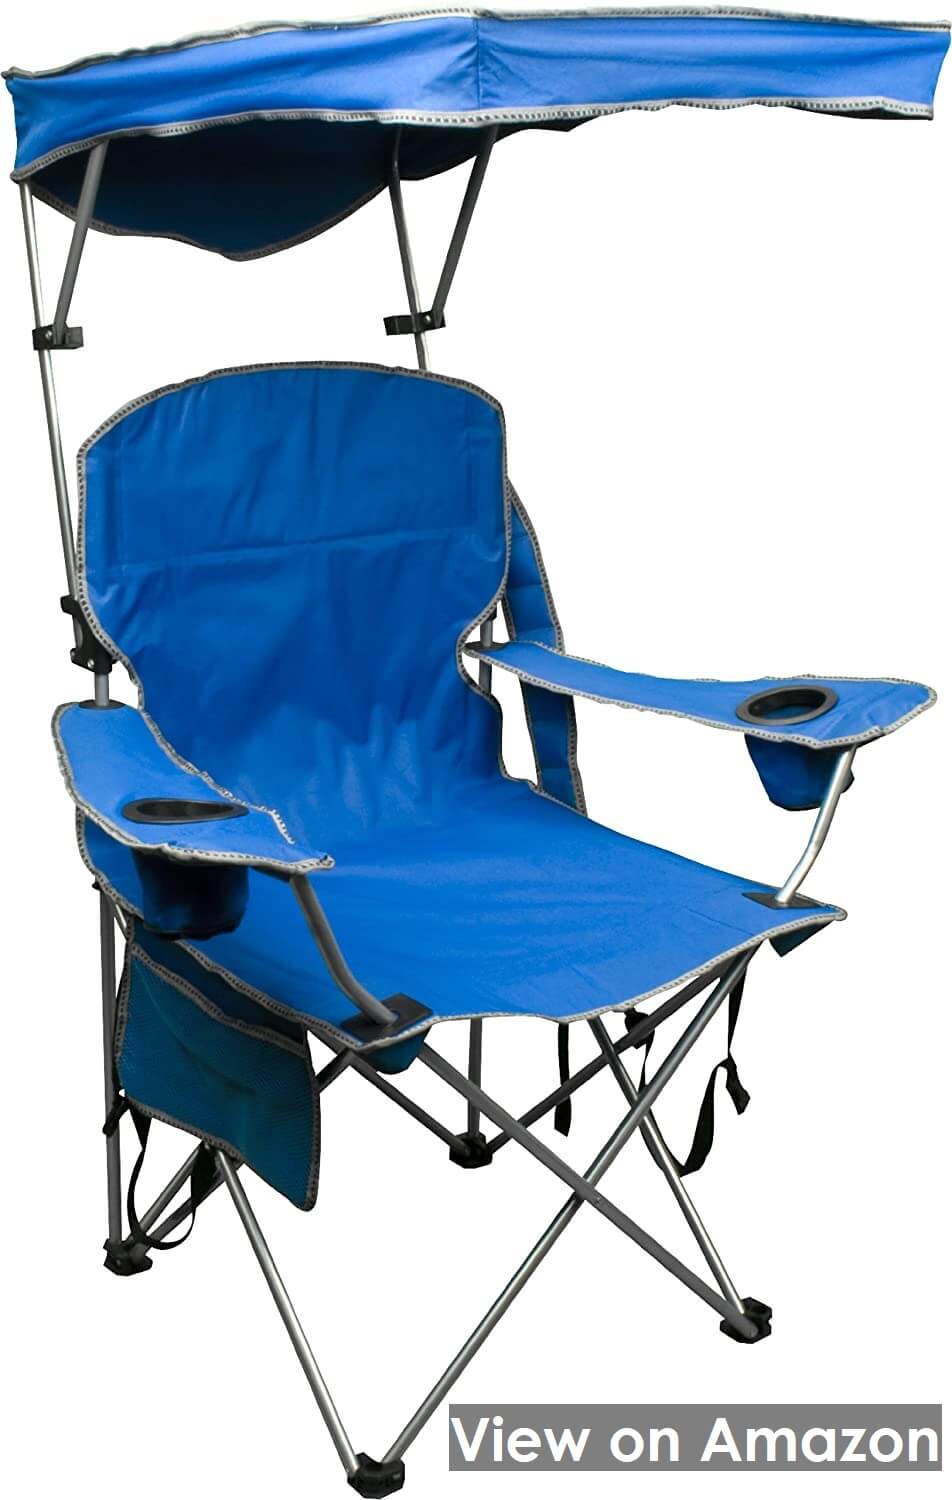 7 Best Chairs For Soccer Games Buyer's Guide HuntChair